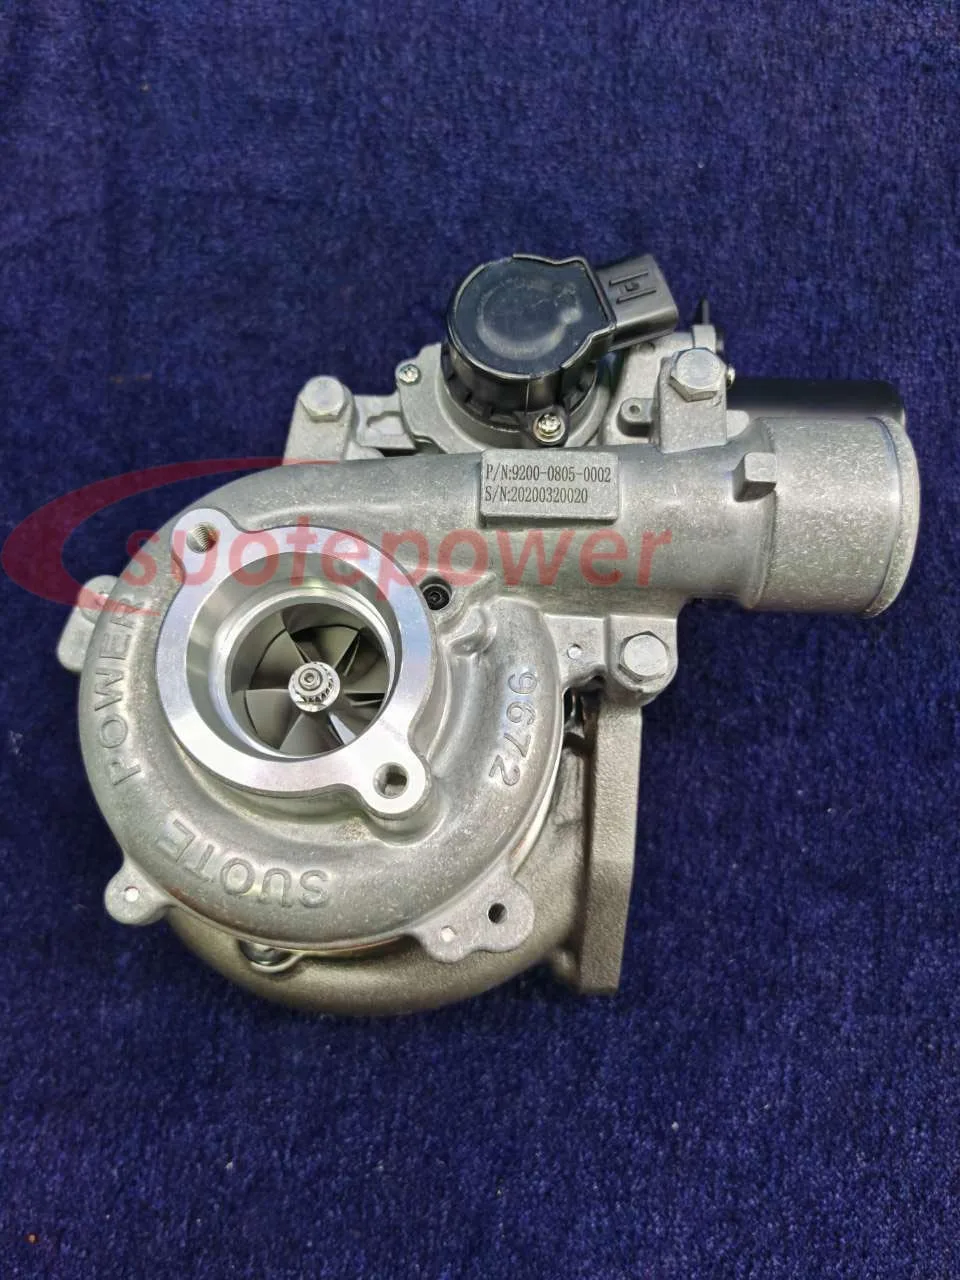 

Suotepower Turbocharger CT16V17201-0L040 17201-30110 turbo Replace Toyota Hilux 3.0 D4D, DAIHATSU DELTA, Landcruiser with Engine